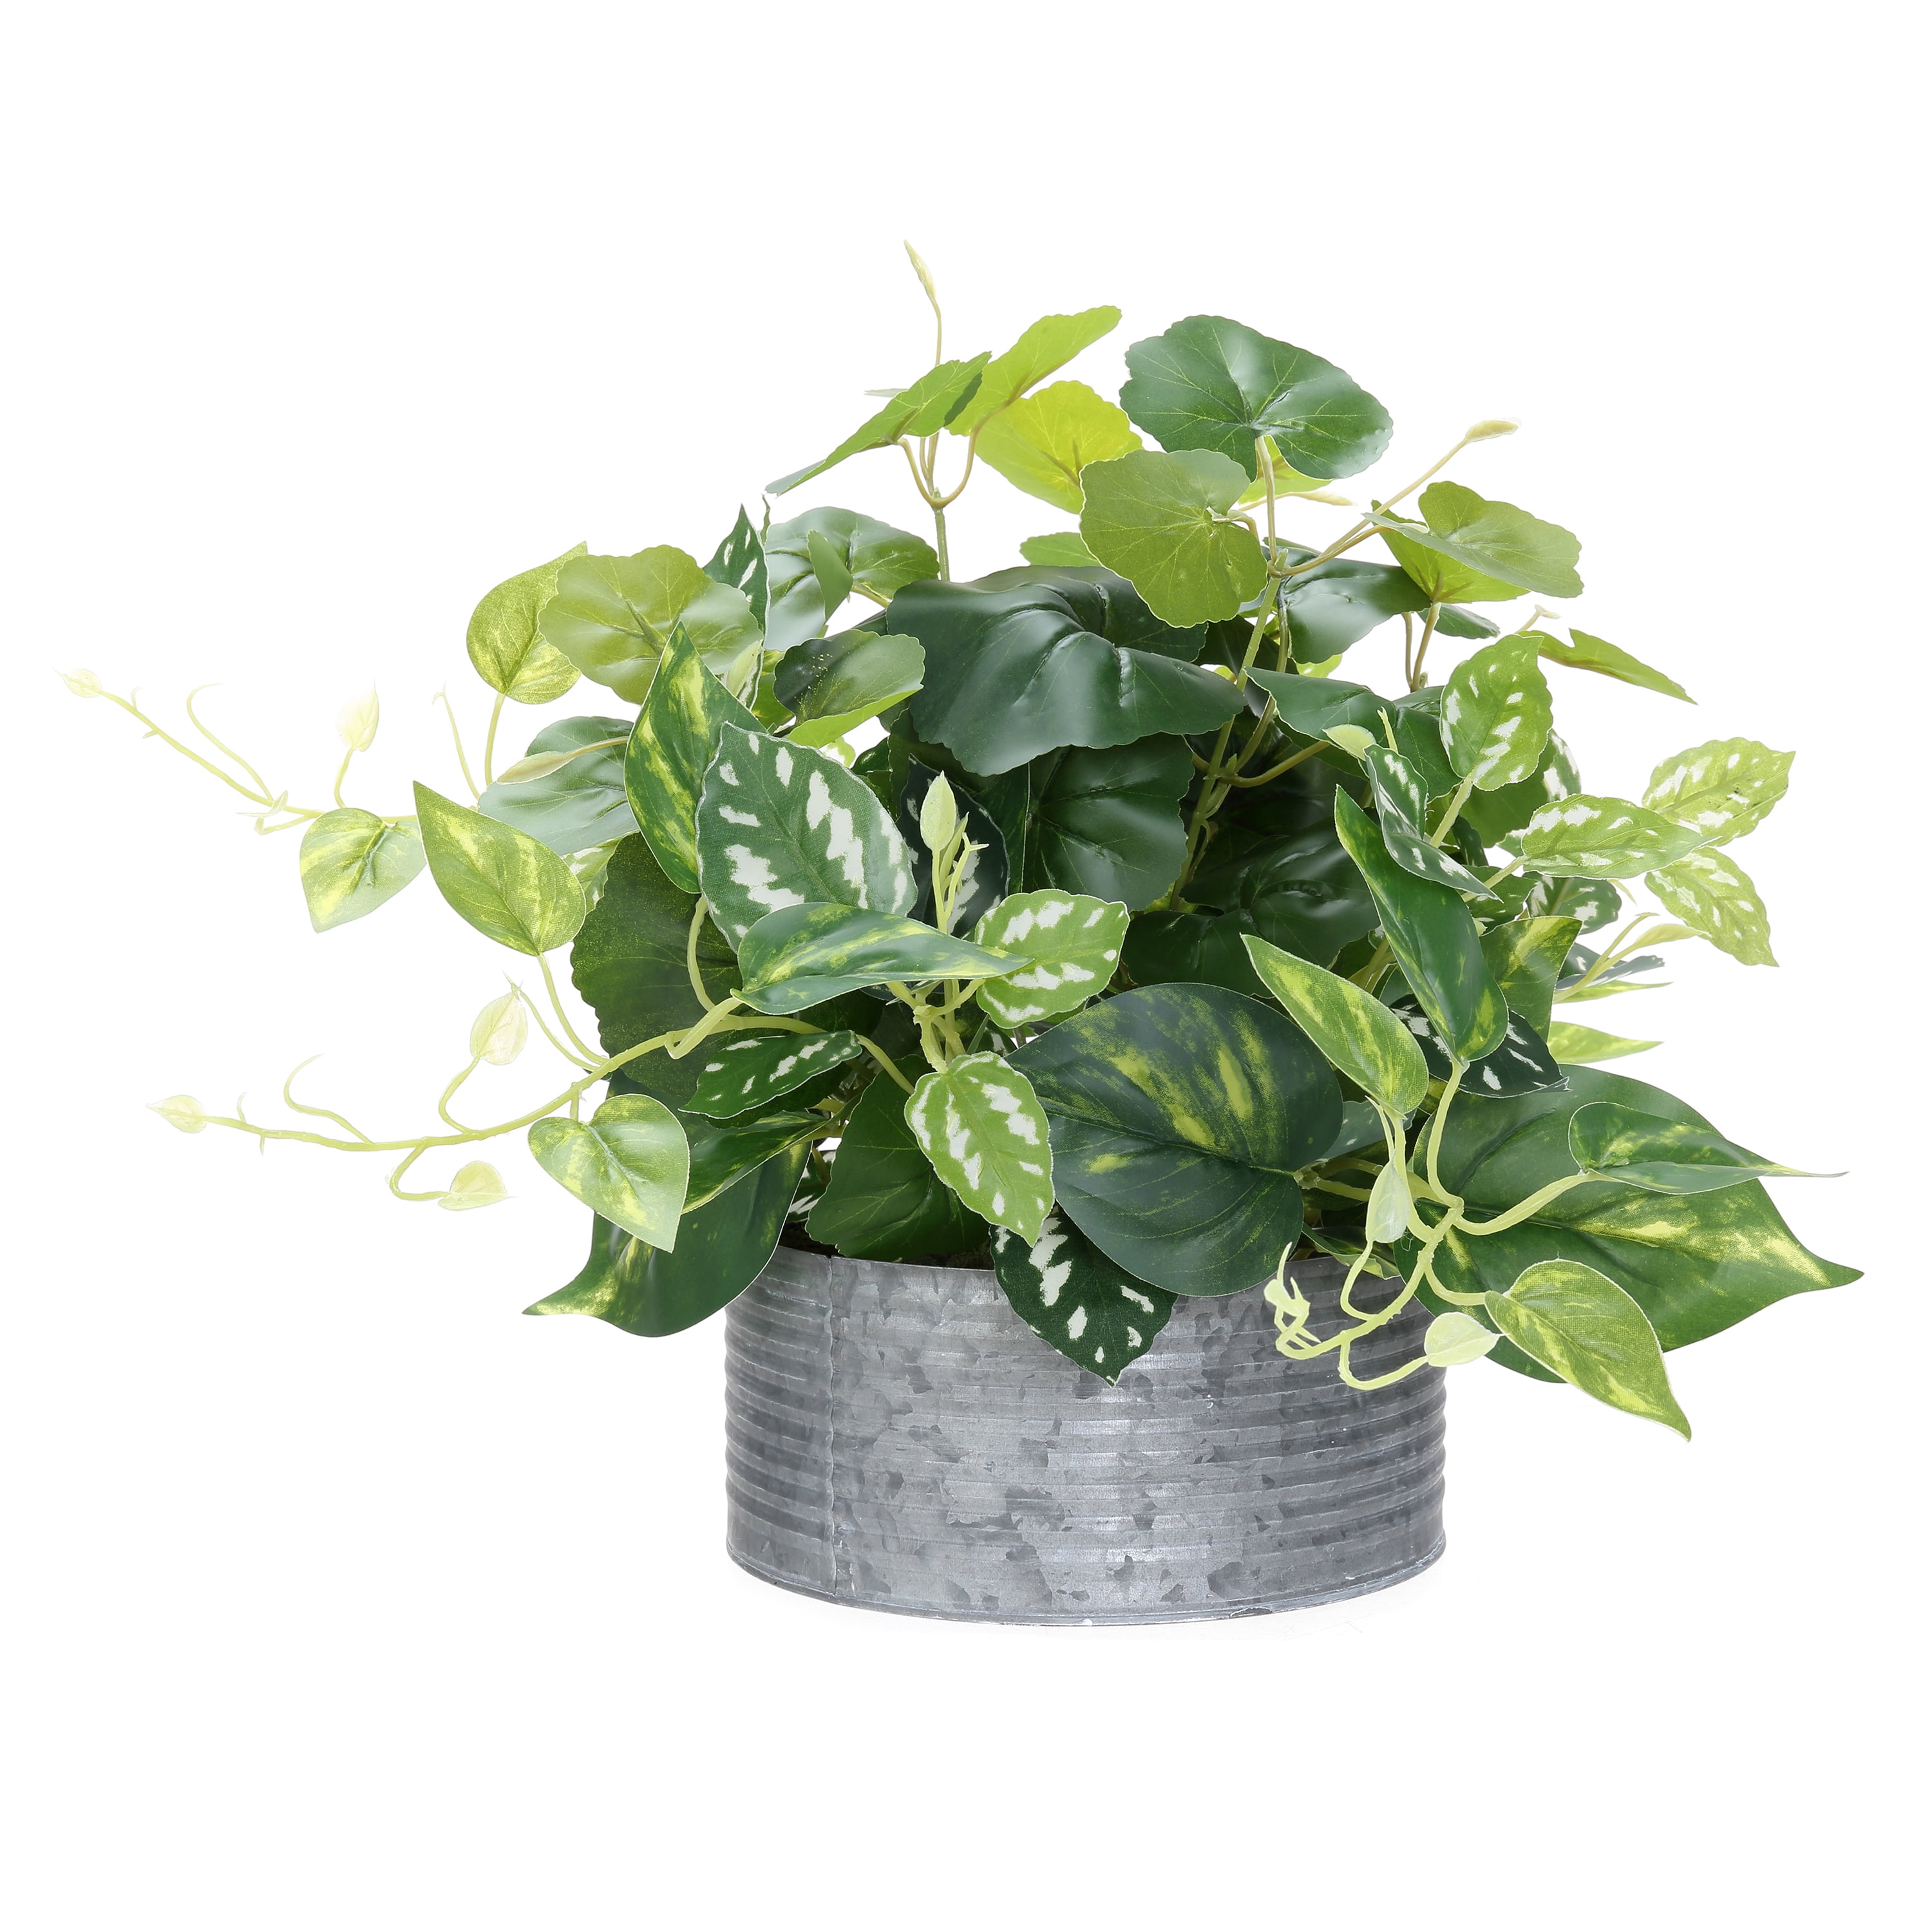 Mainstays 12" Green Artificial Ivy Plant in Silver Galvanized Container